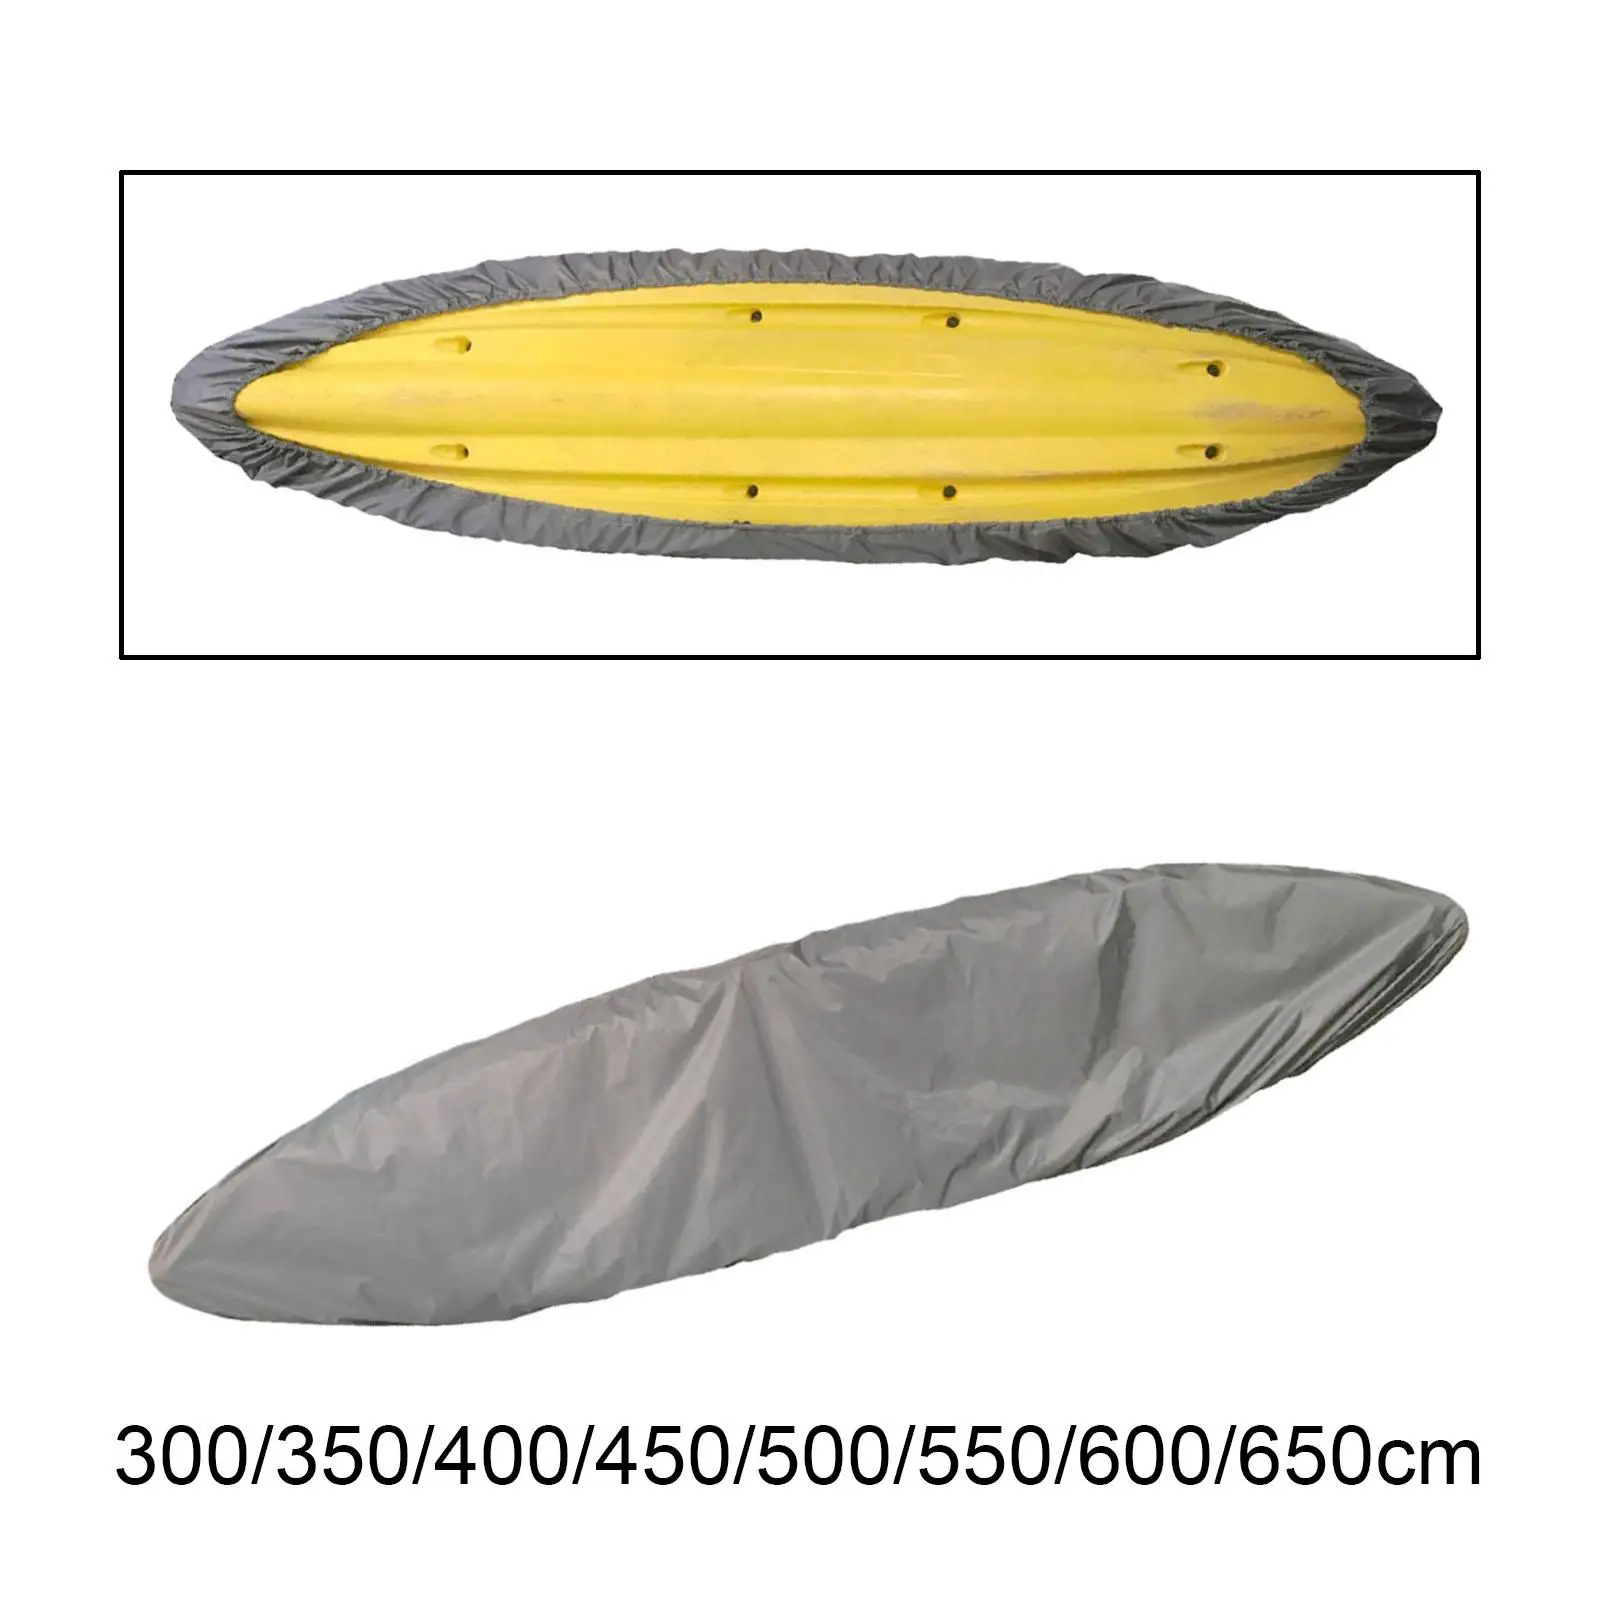 Boat Storage Cover Kayak Canoe Cover Protector Canoe Cover Waterproof Kayak Cover for Kayaking Canoeing Water Sports Drifting